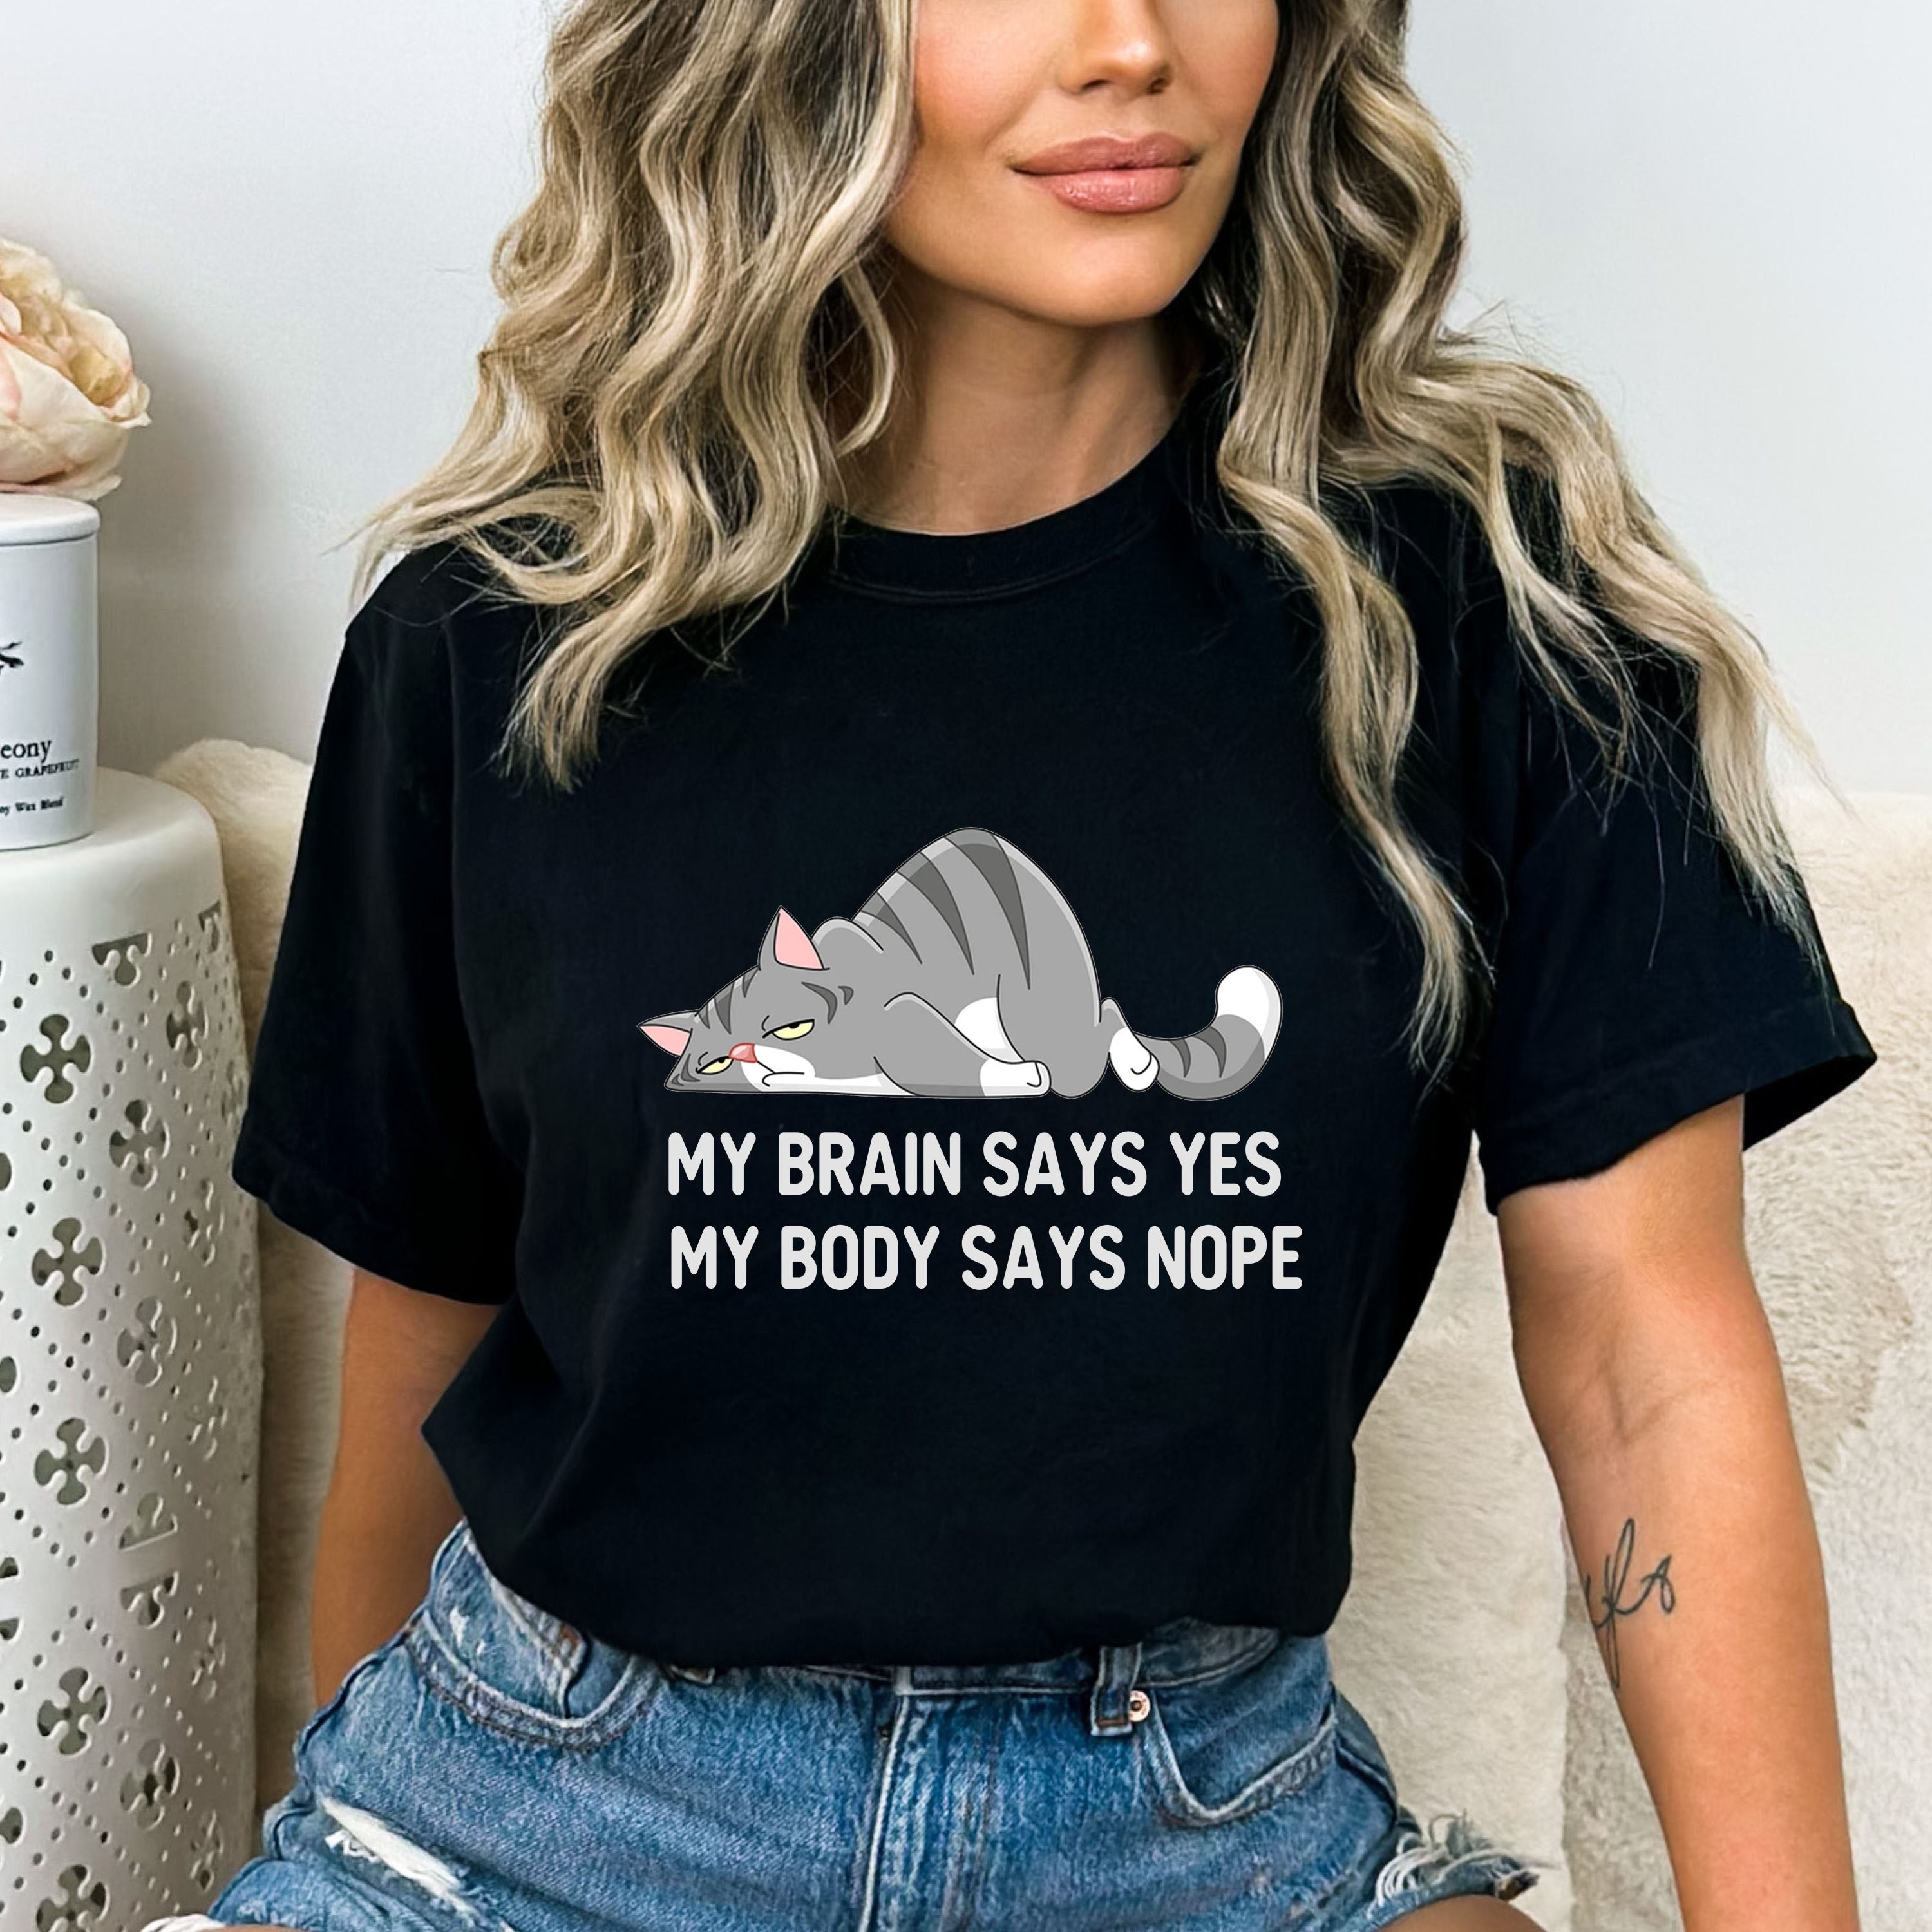 My Brains Says Yes - Bella canvas